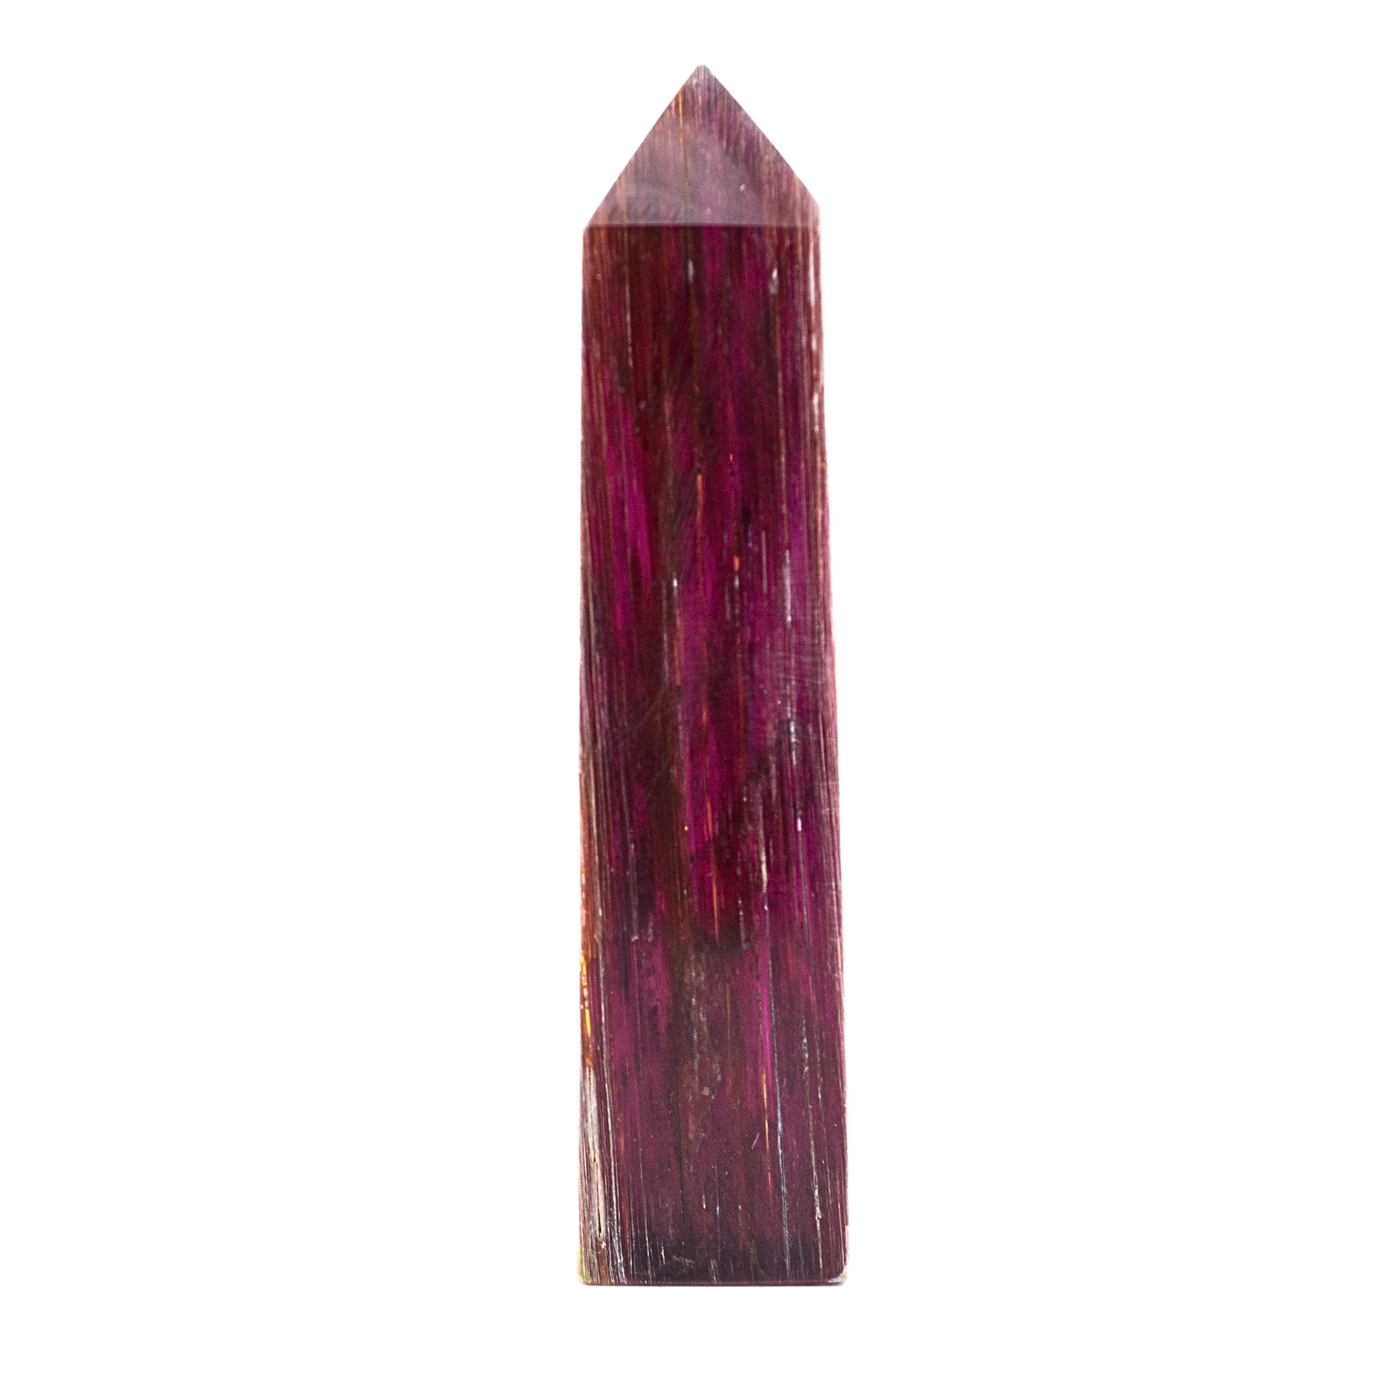 product view of gem-grade Lepidolite Point with violet hues by Energy Muse